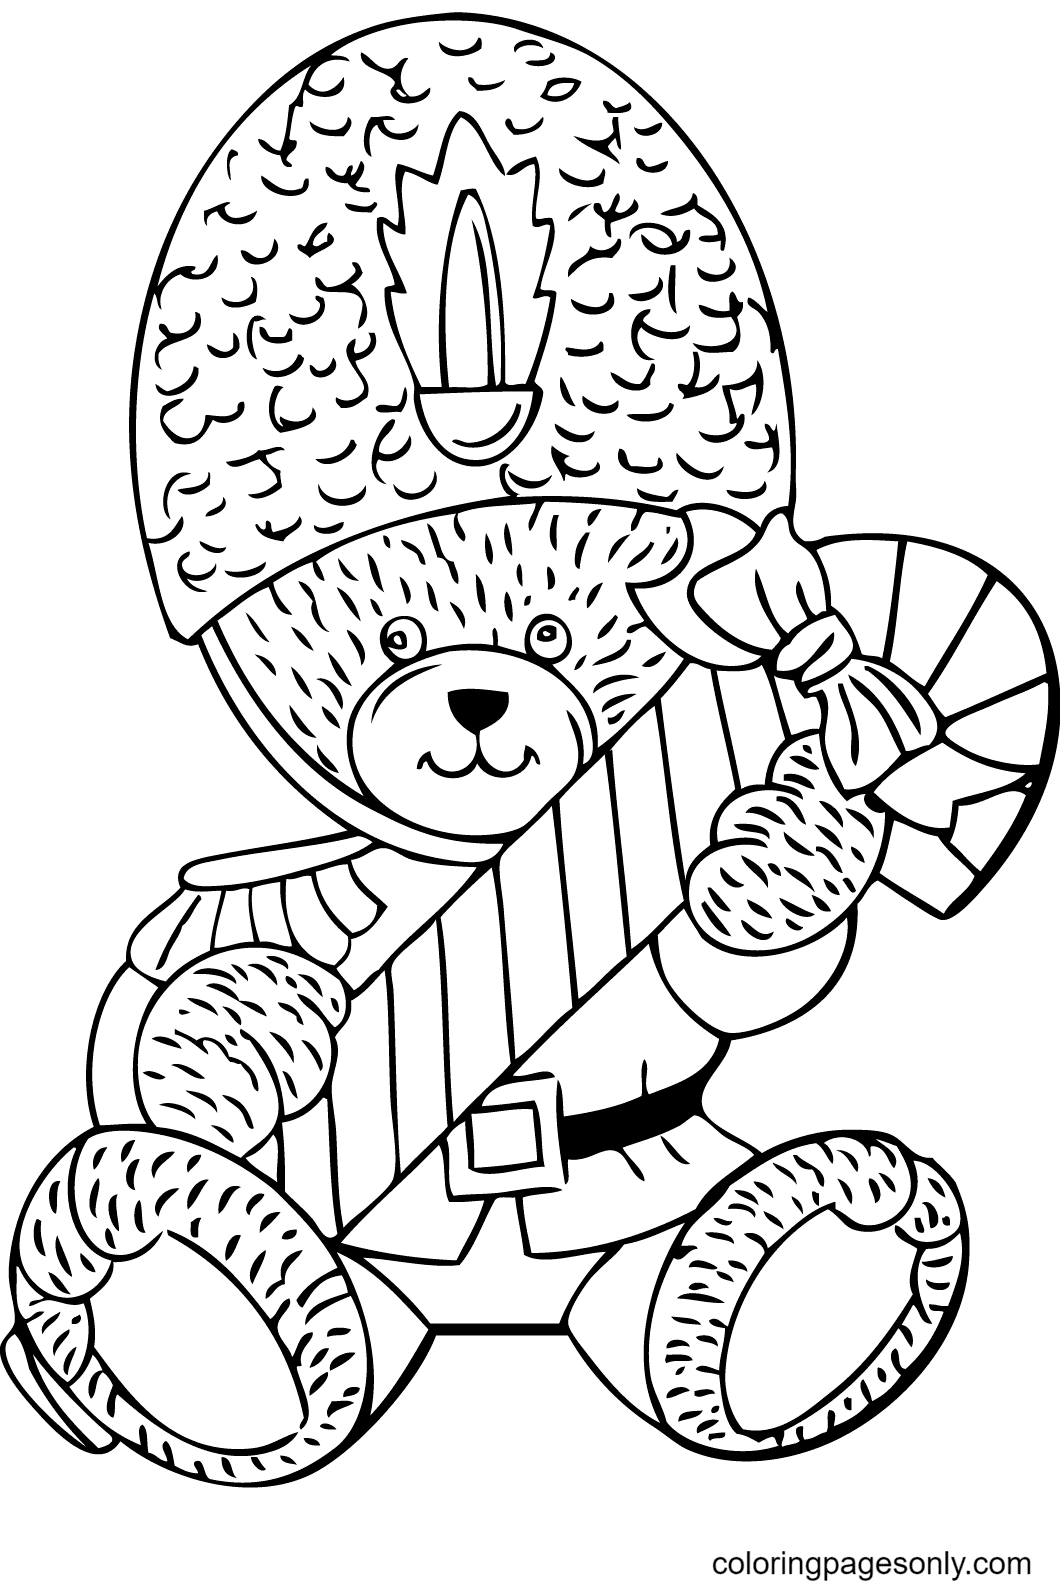 Teddy Bear with Candy Cane Coloring Pages